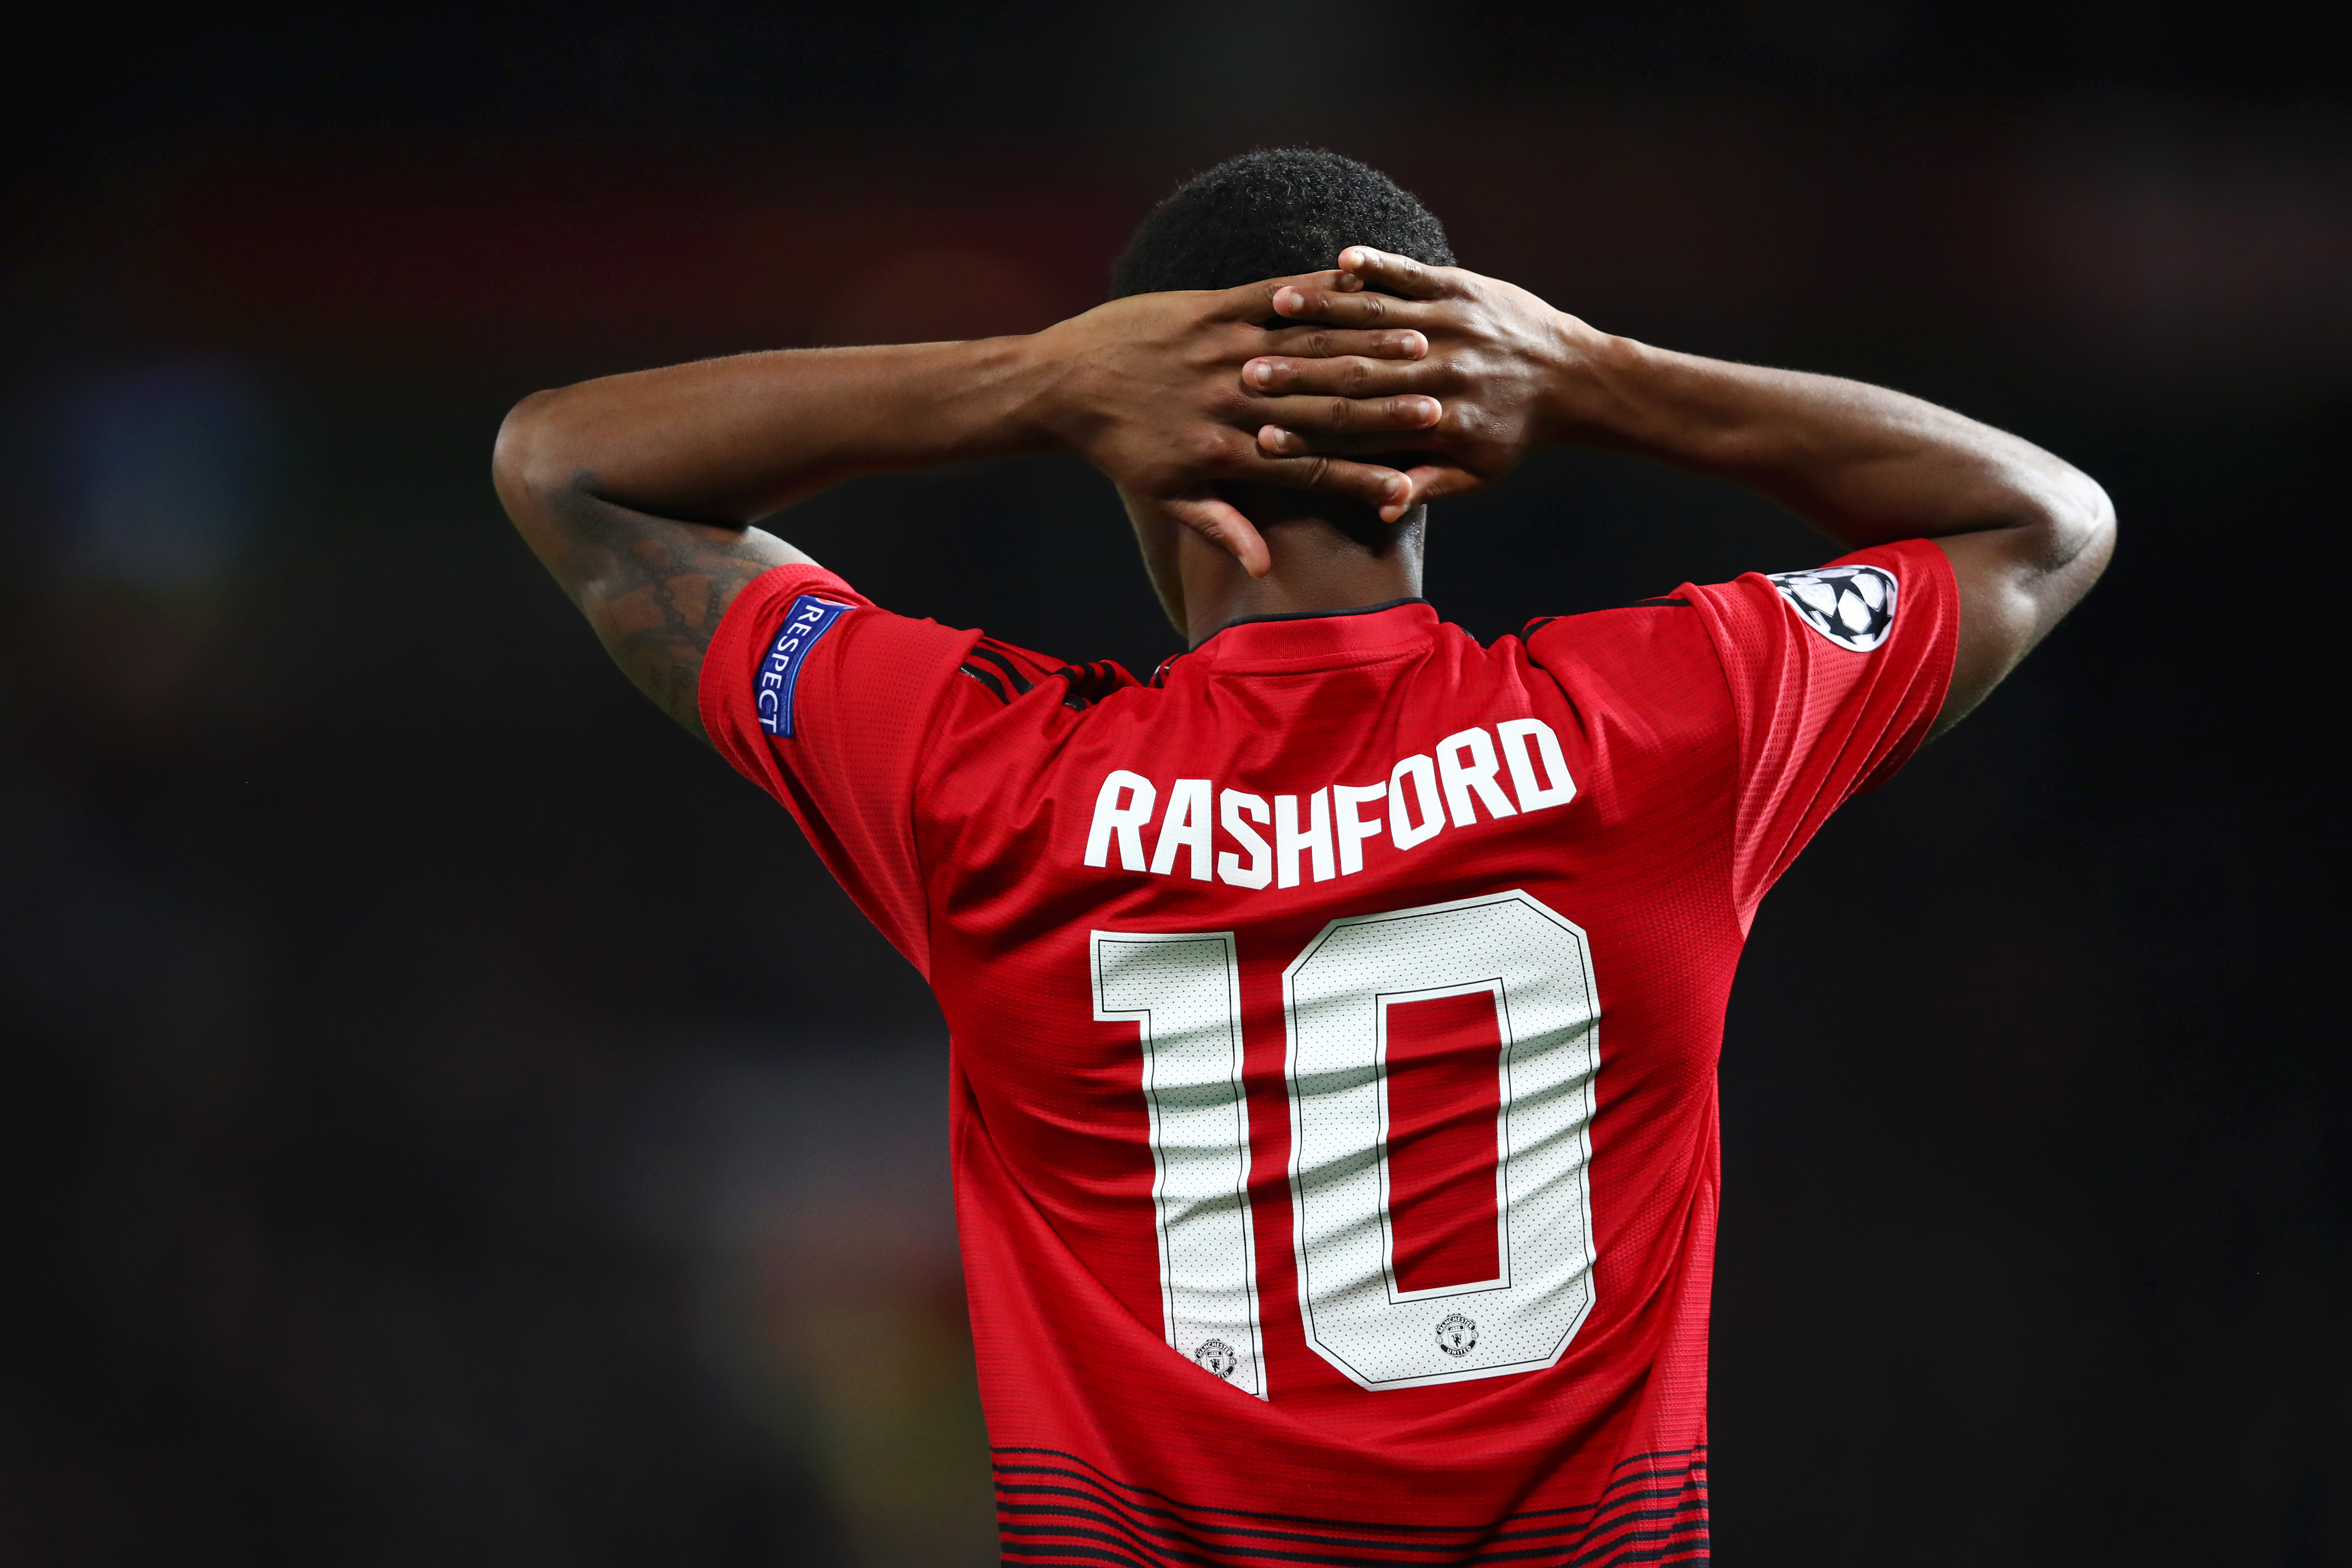 MANCHESTER, ENGLAND - OCTOBER 02:  Marcus Rashford of Manchester United reacts during the Group H match of the UEFA Champions League between Manchester United and Valencia at Old Trafford on October 2, 2018 in Manchester, United Kingdom.  (Photo by Clive Brunskill/Getty Images)